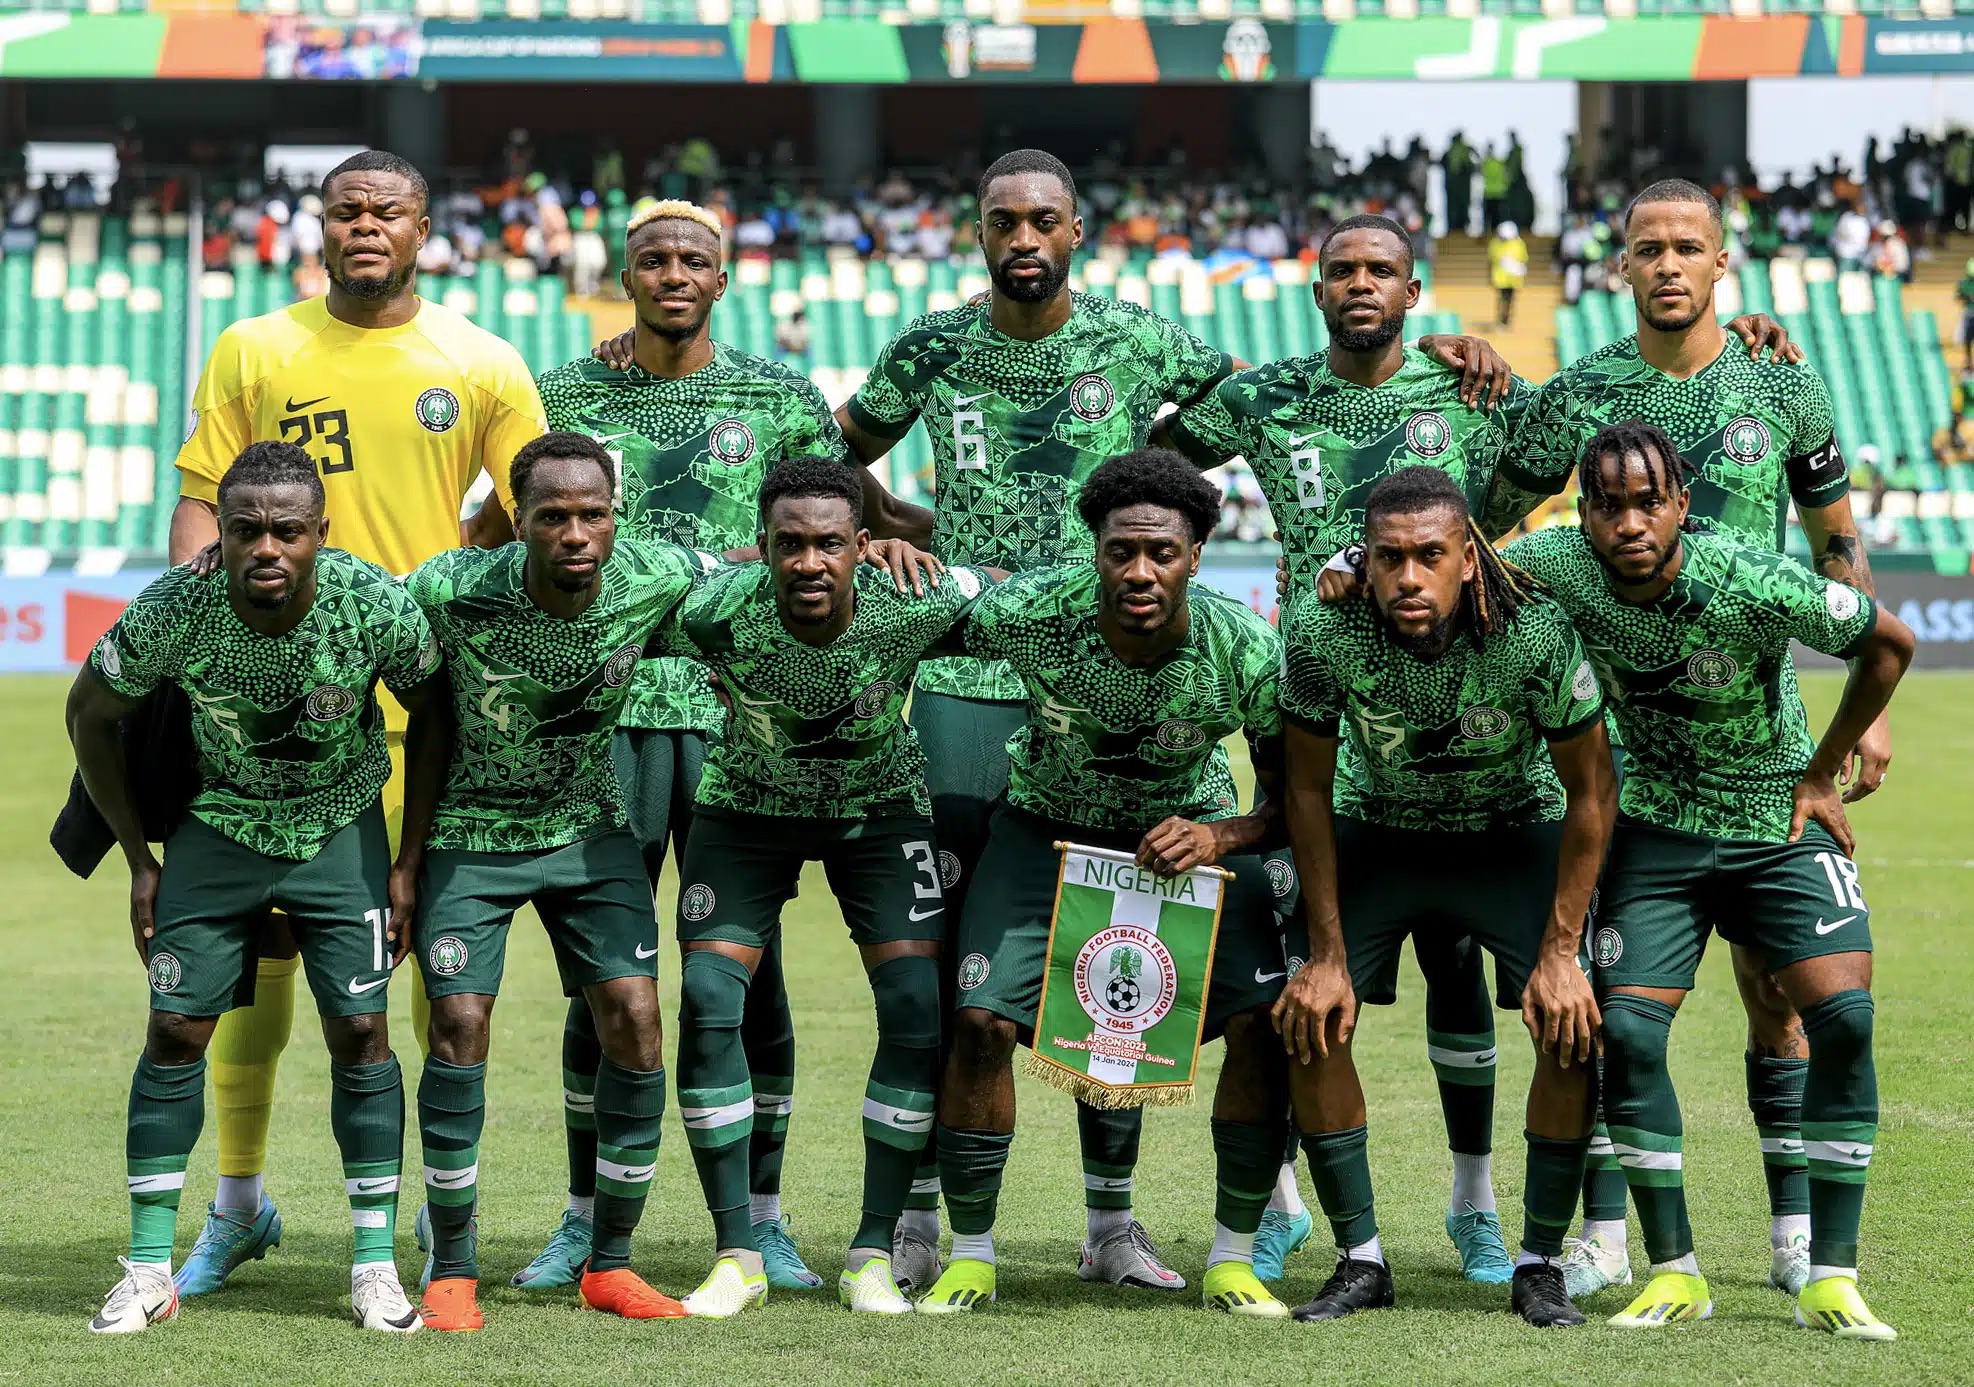 Super Eagles team will get $7m if they win the tournament